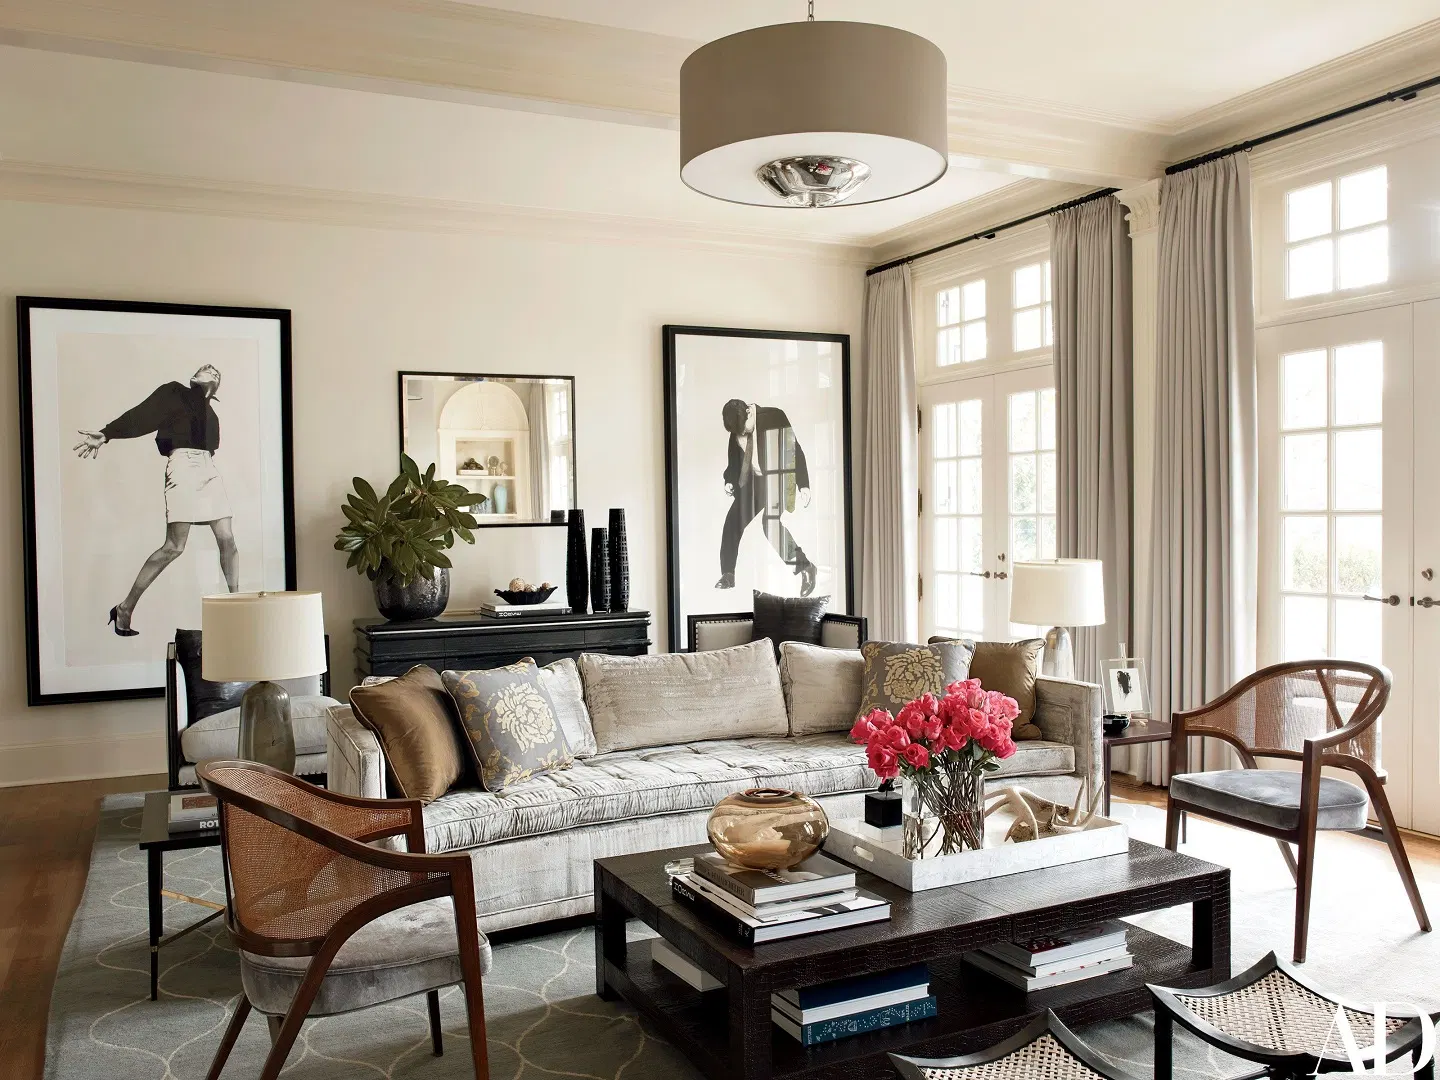 6. Gray and Beige: Timeless Neutrals